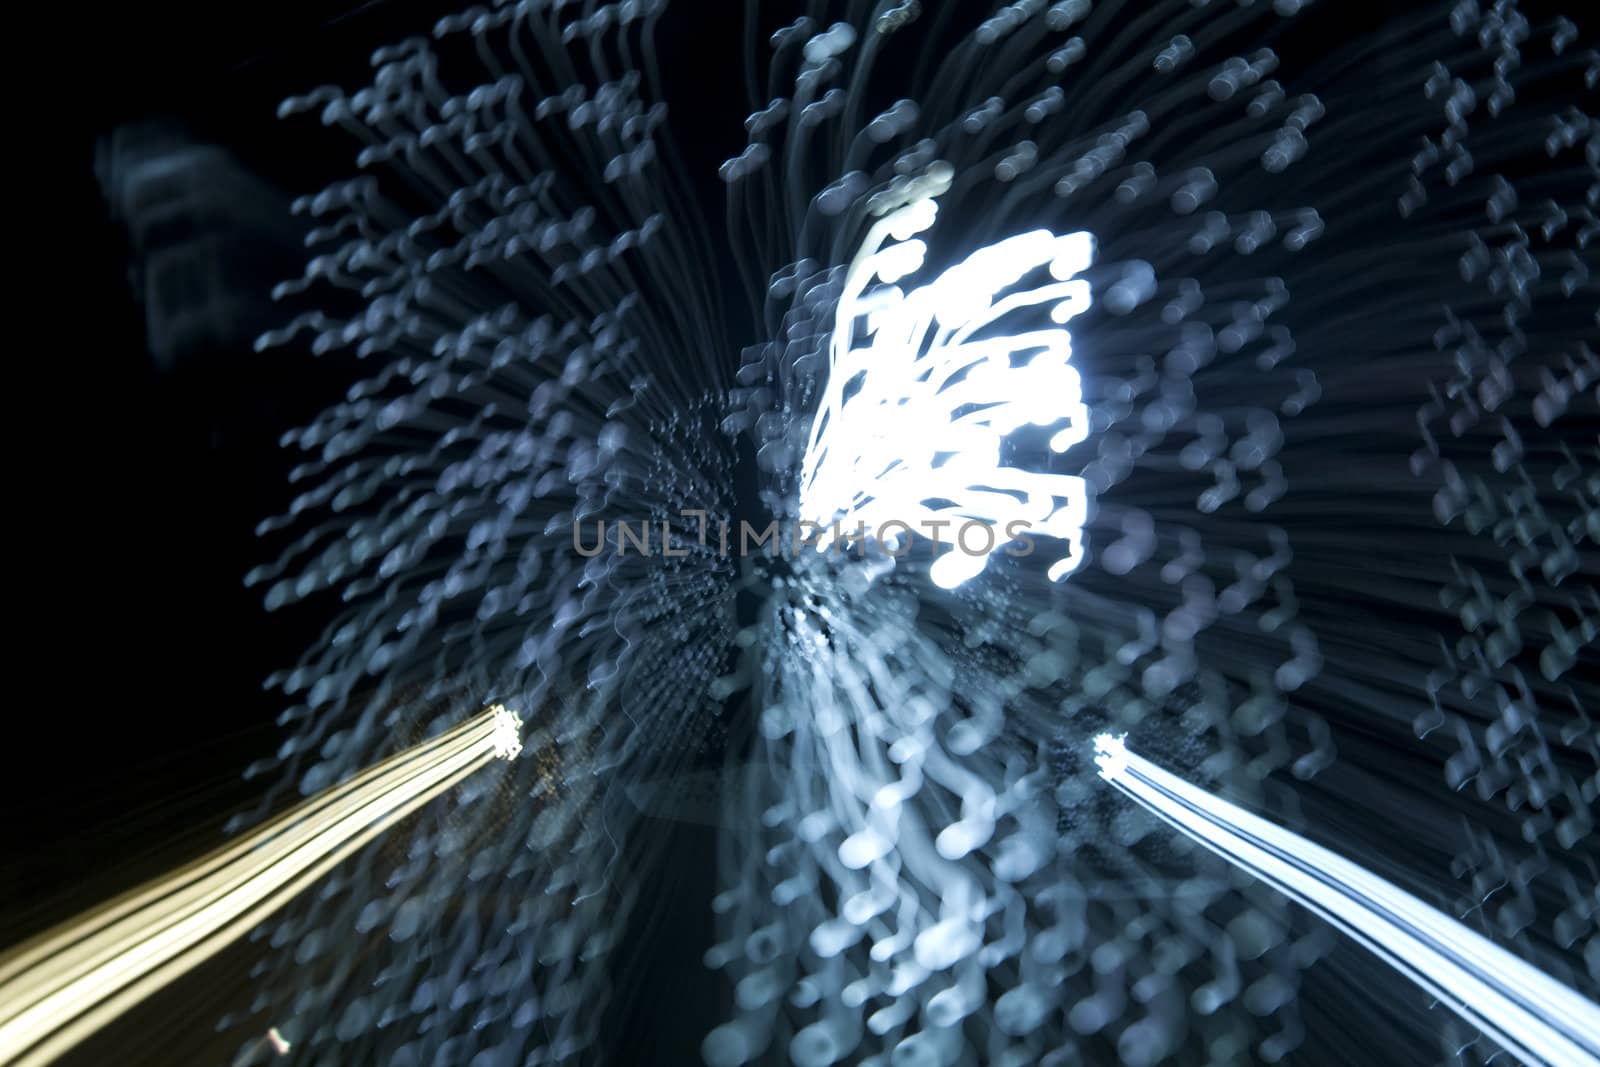 Abstract light painting